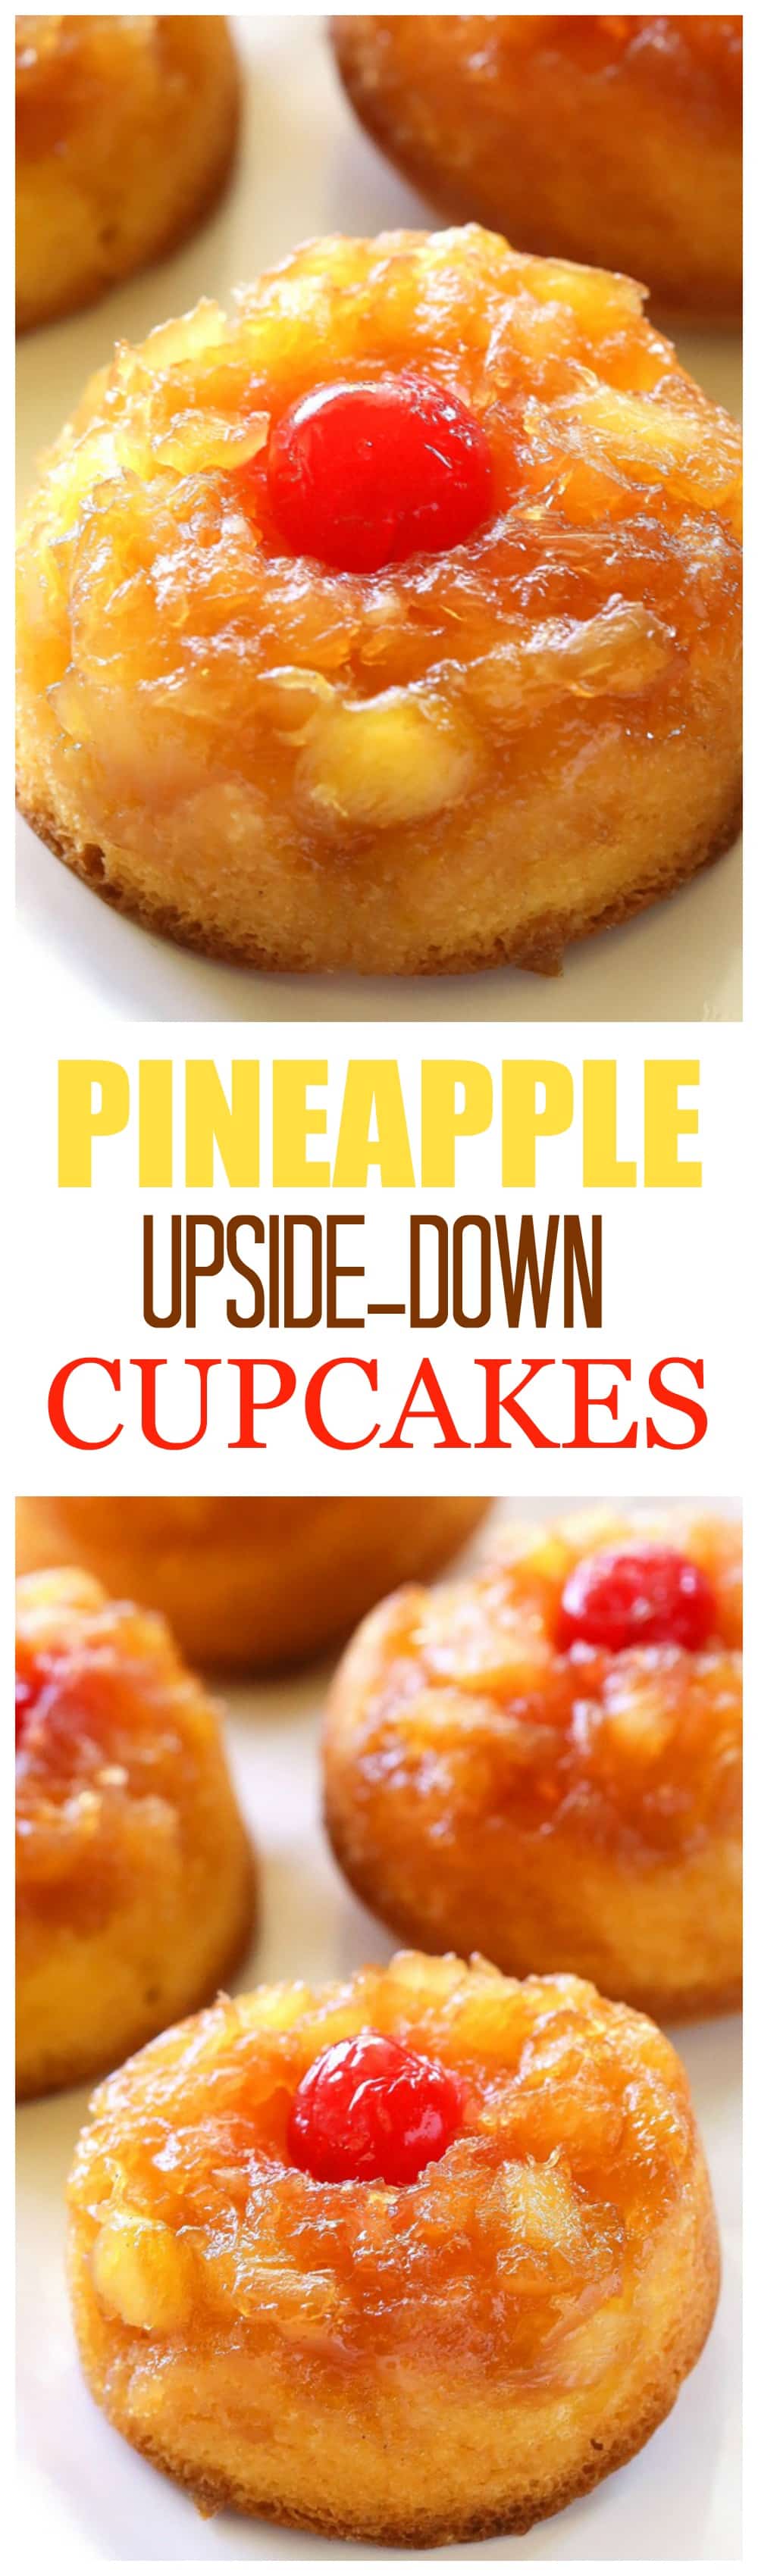 Pineapple Upside Down Cupcakes - a mini version of your favorite cake with butter, brown sugar, pineapple, and a cherry on top! #pineapple #upsidedown #cupcakes #recipe